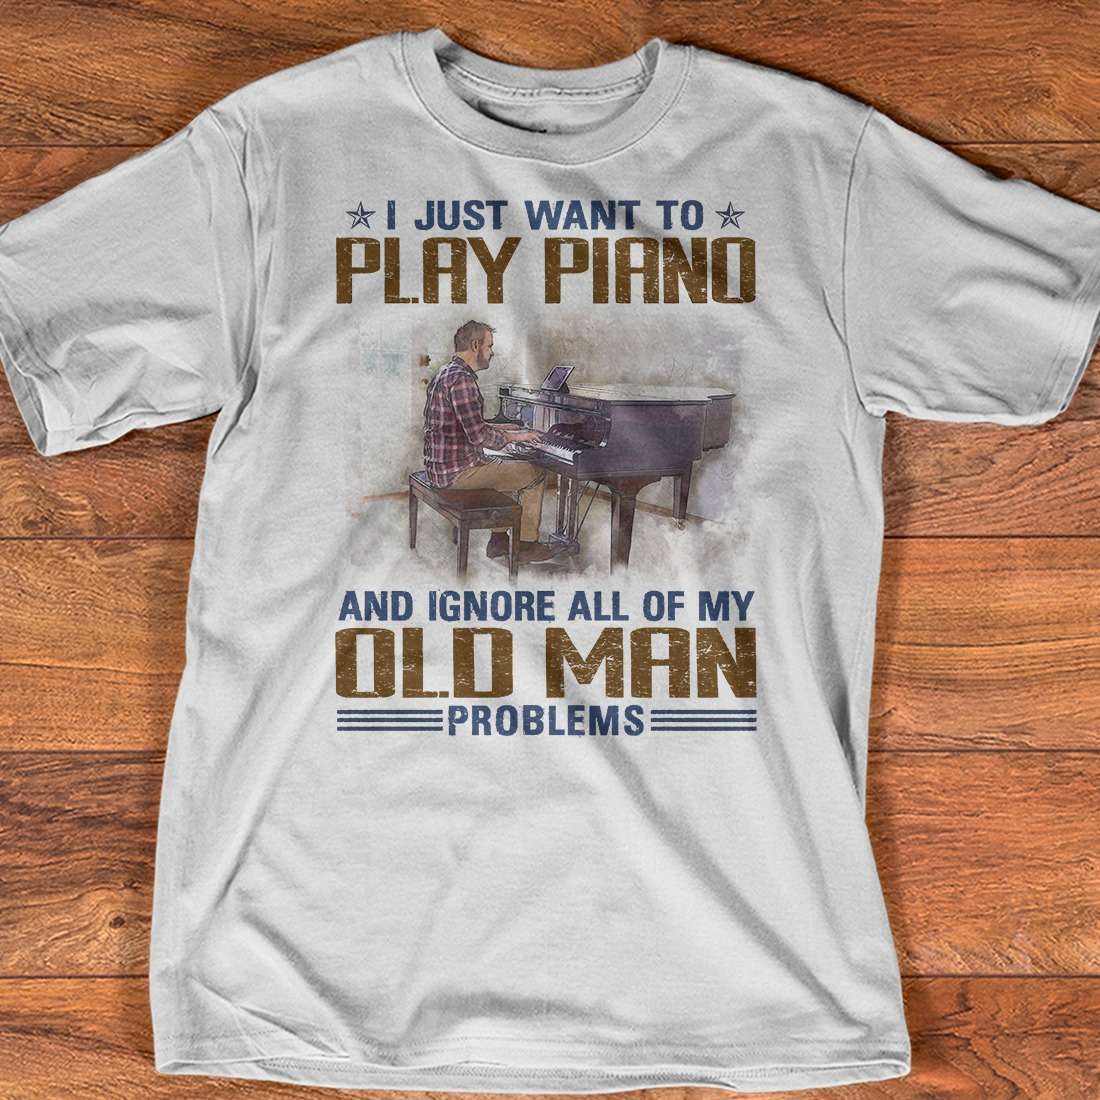 I just want to play piano and ignore all of my old man problems - Old man pianist